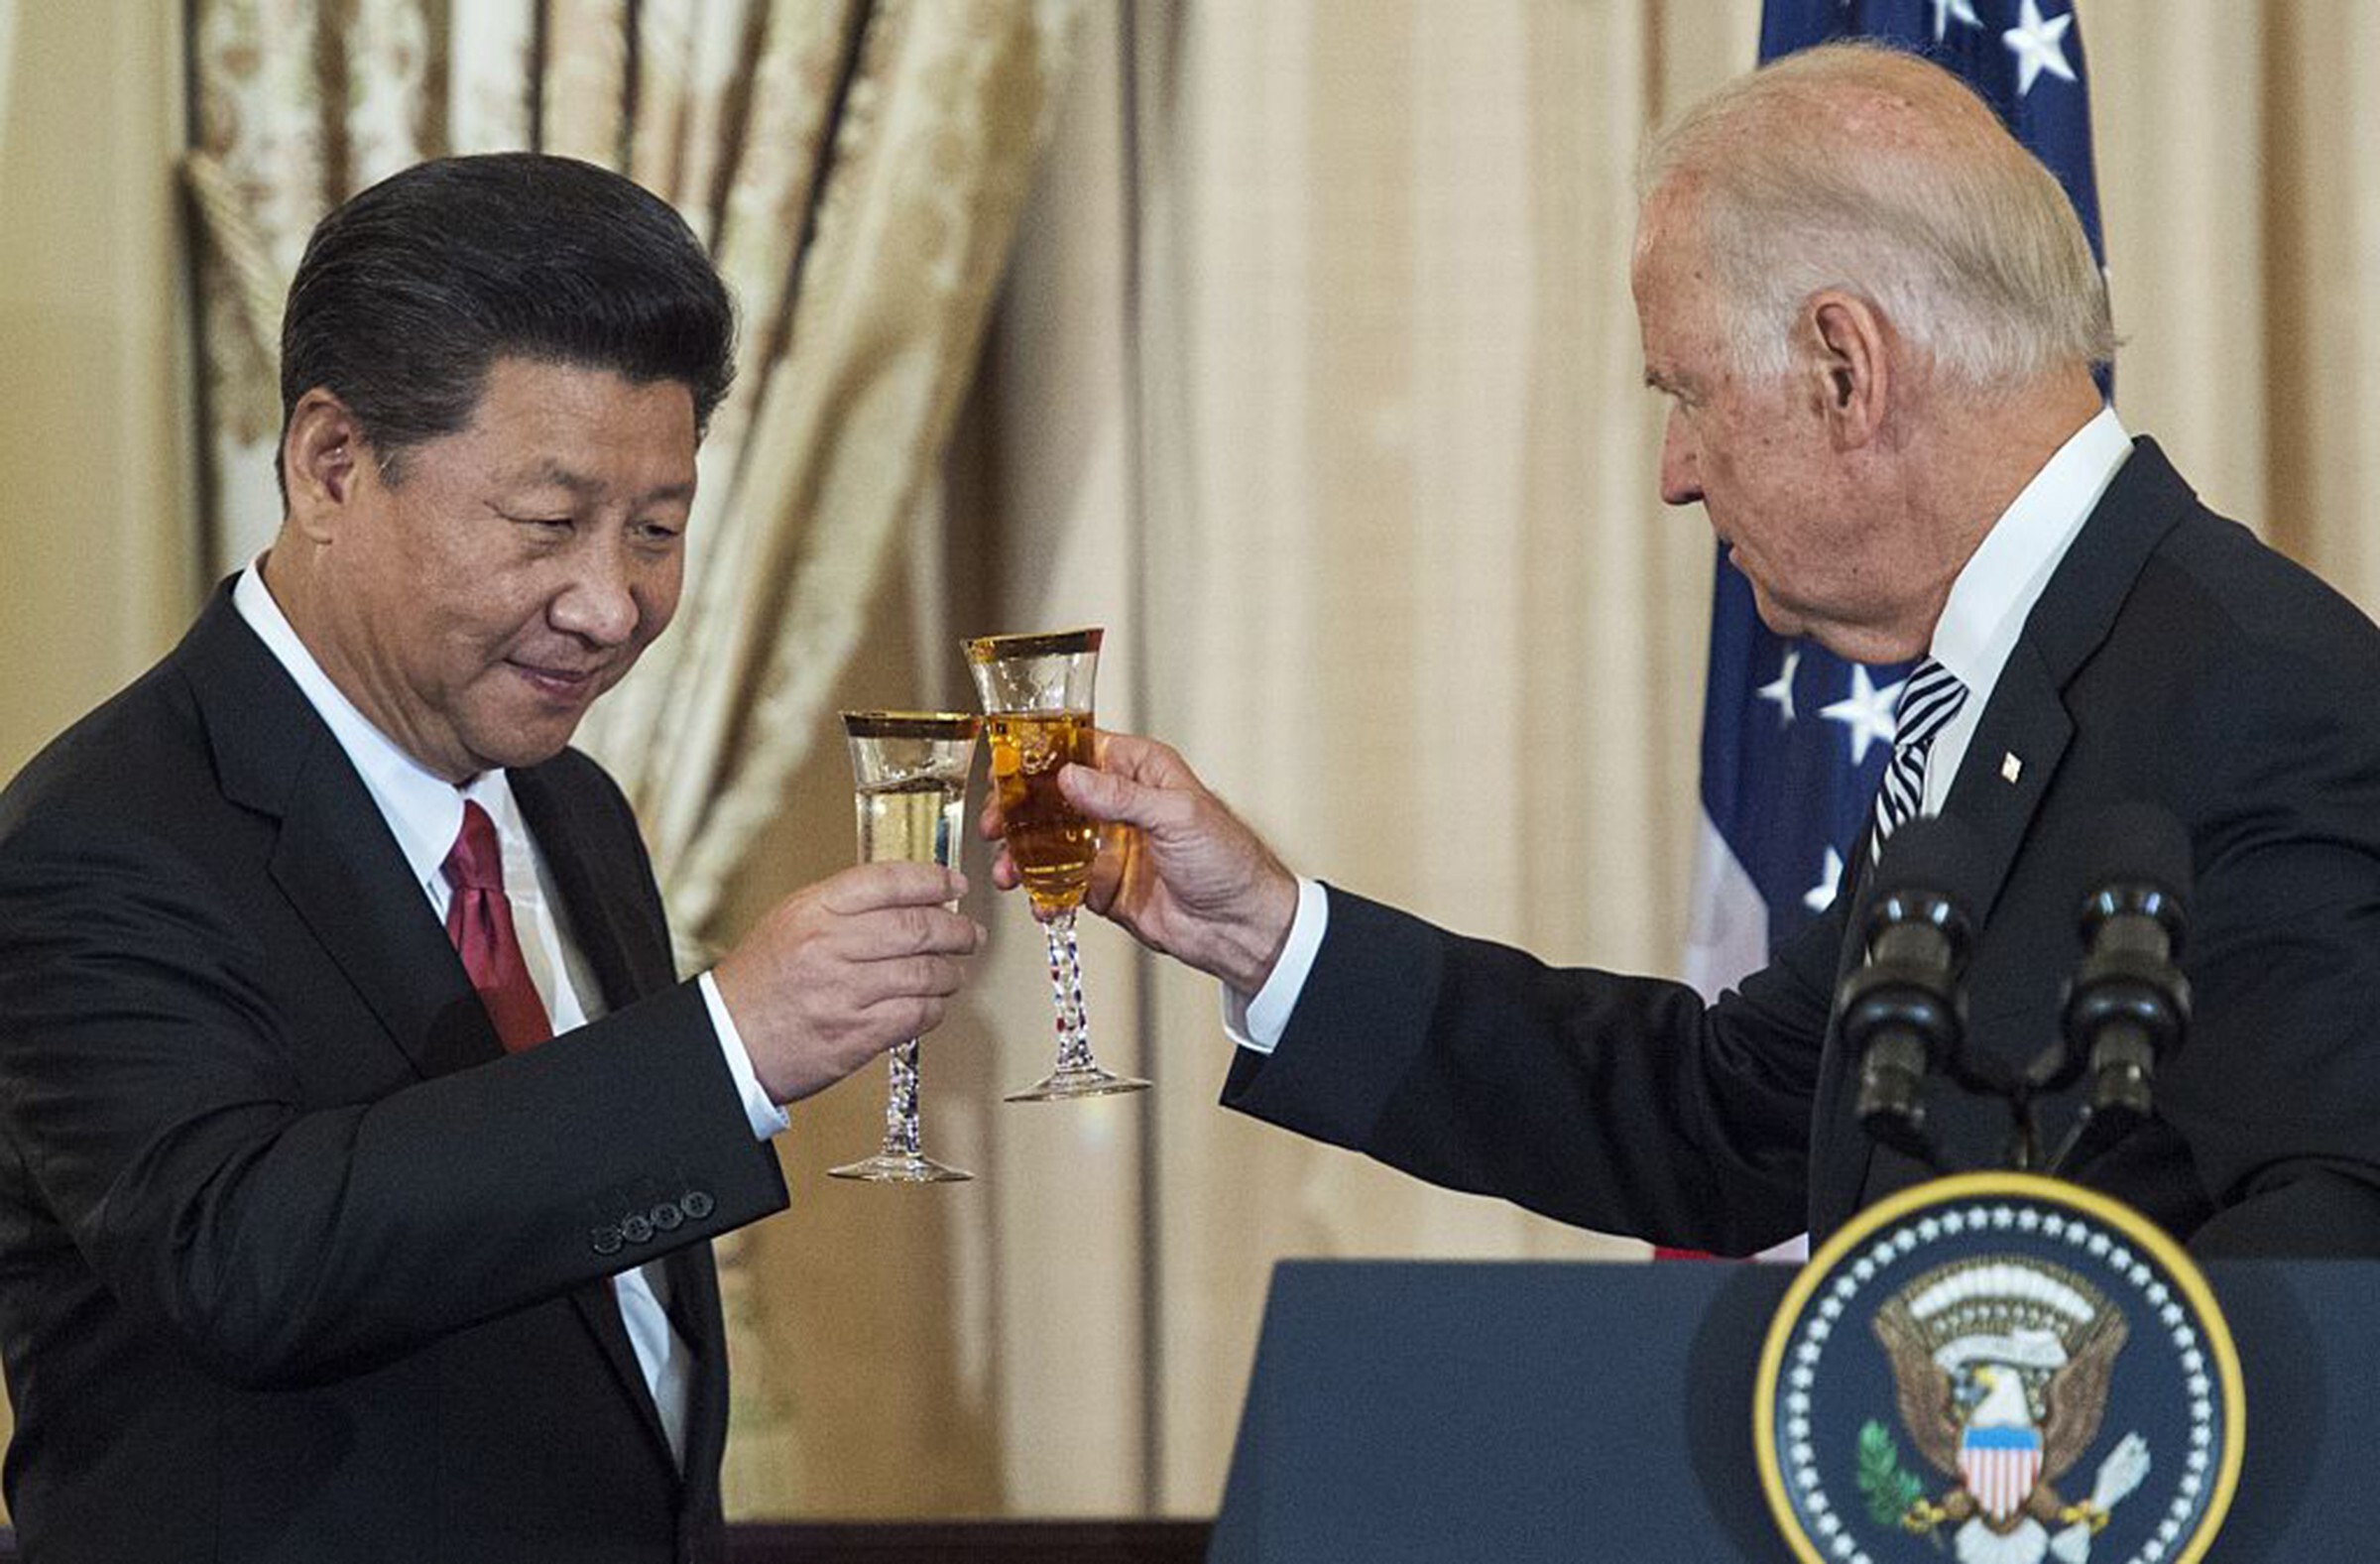 Then US vice-president Joe Biden and Chinese President Xi Jinping raise a toast during a state lunch for China at the Department of State in Washington in September 2015. Photo: AFP